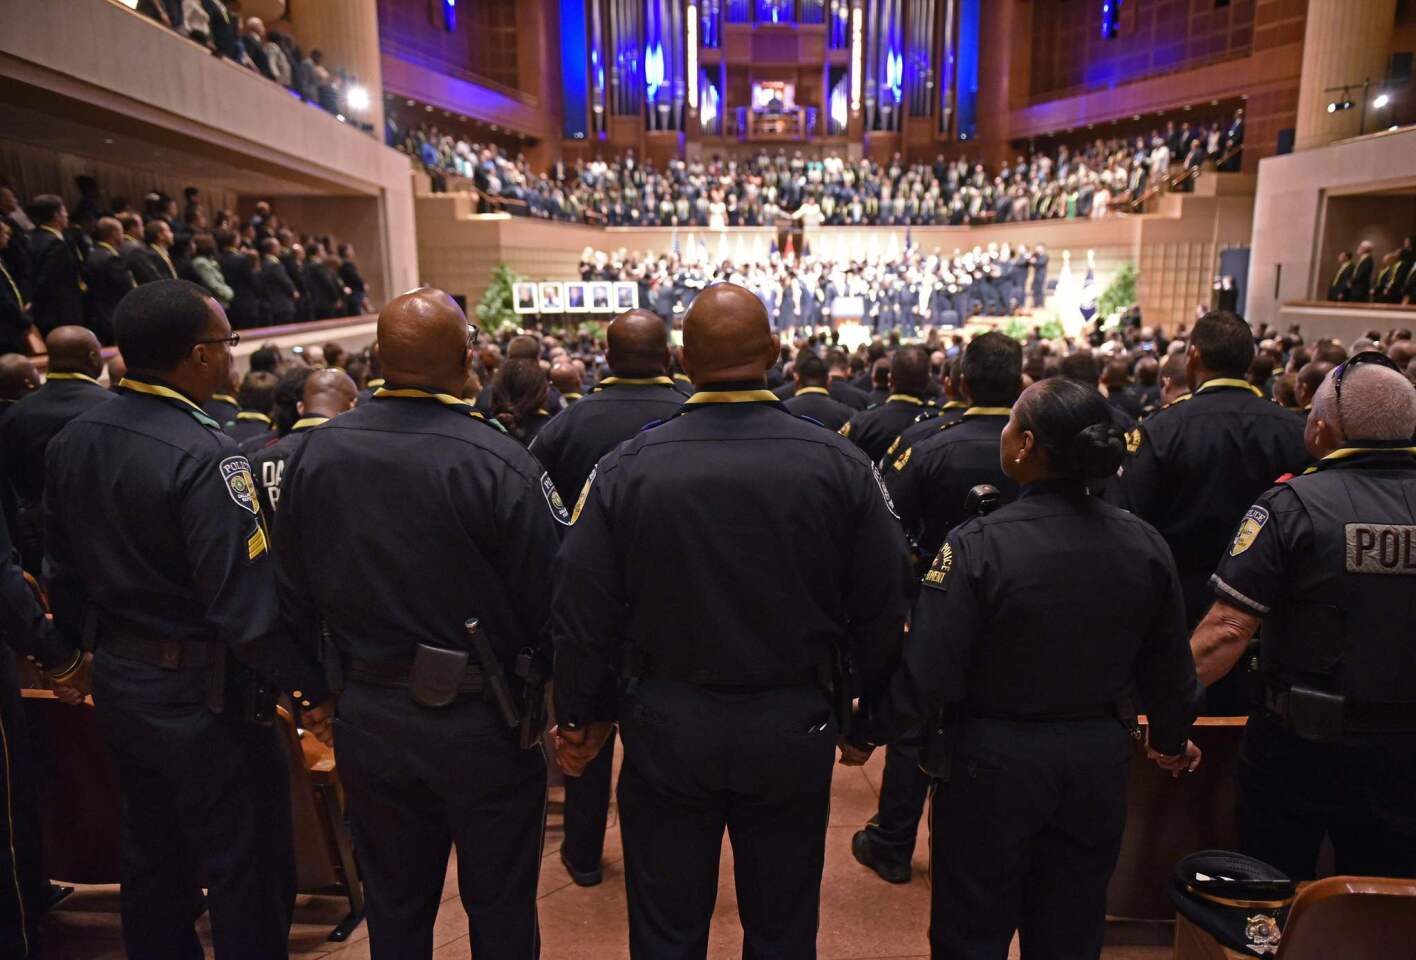 Police join hands during the singing of "The Battle Hymn of the Republic" during an interfaith memorial service for the victims of the Dallas police shooting at the Morton H. Meyerson Symphony Center on July 12, 2016 in Dallas, Texas.